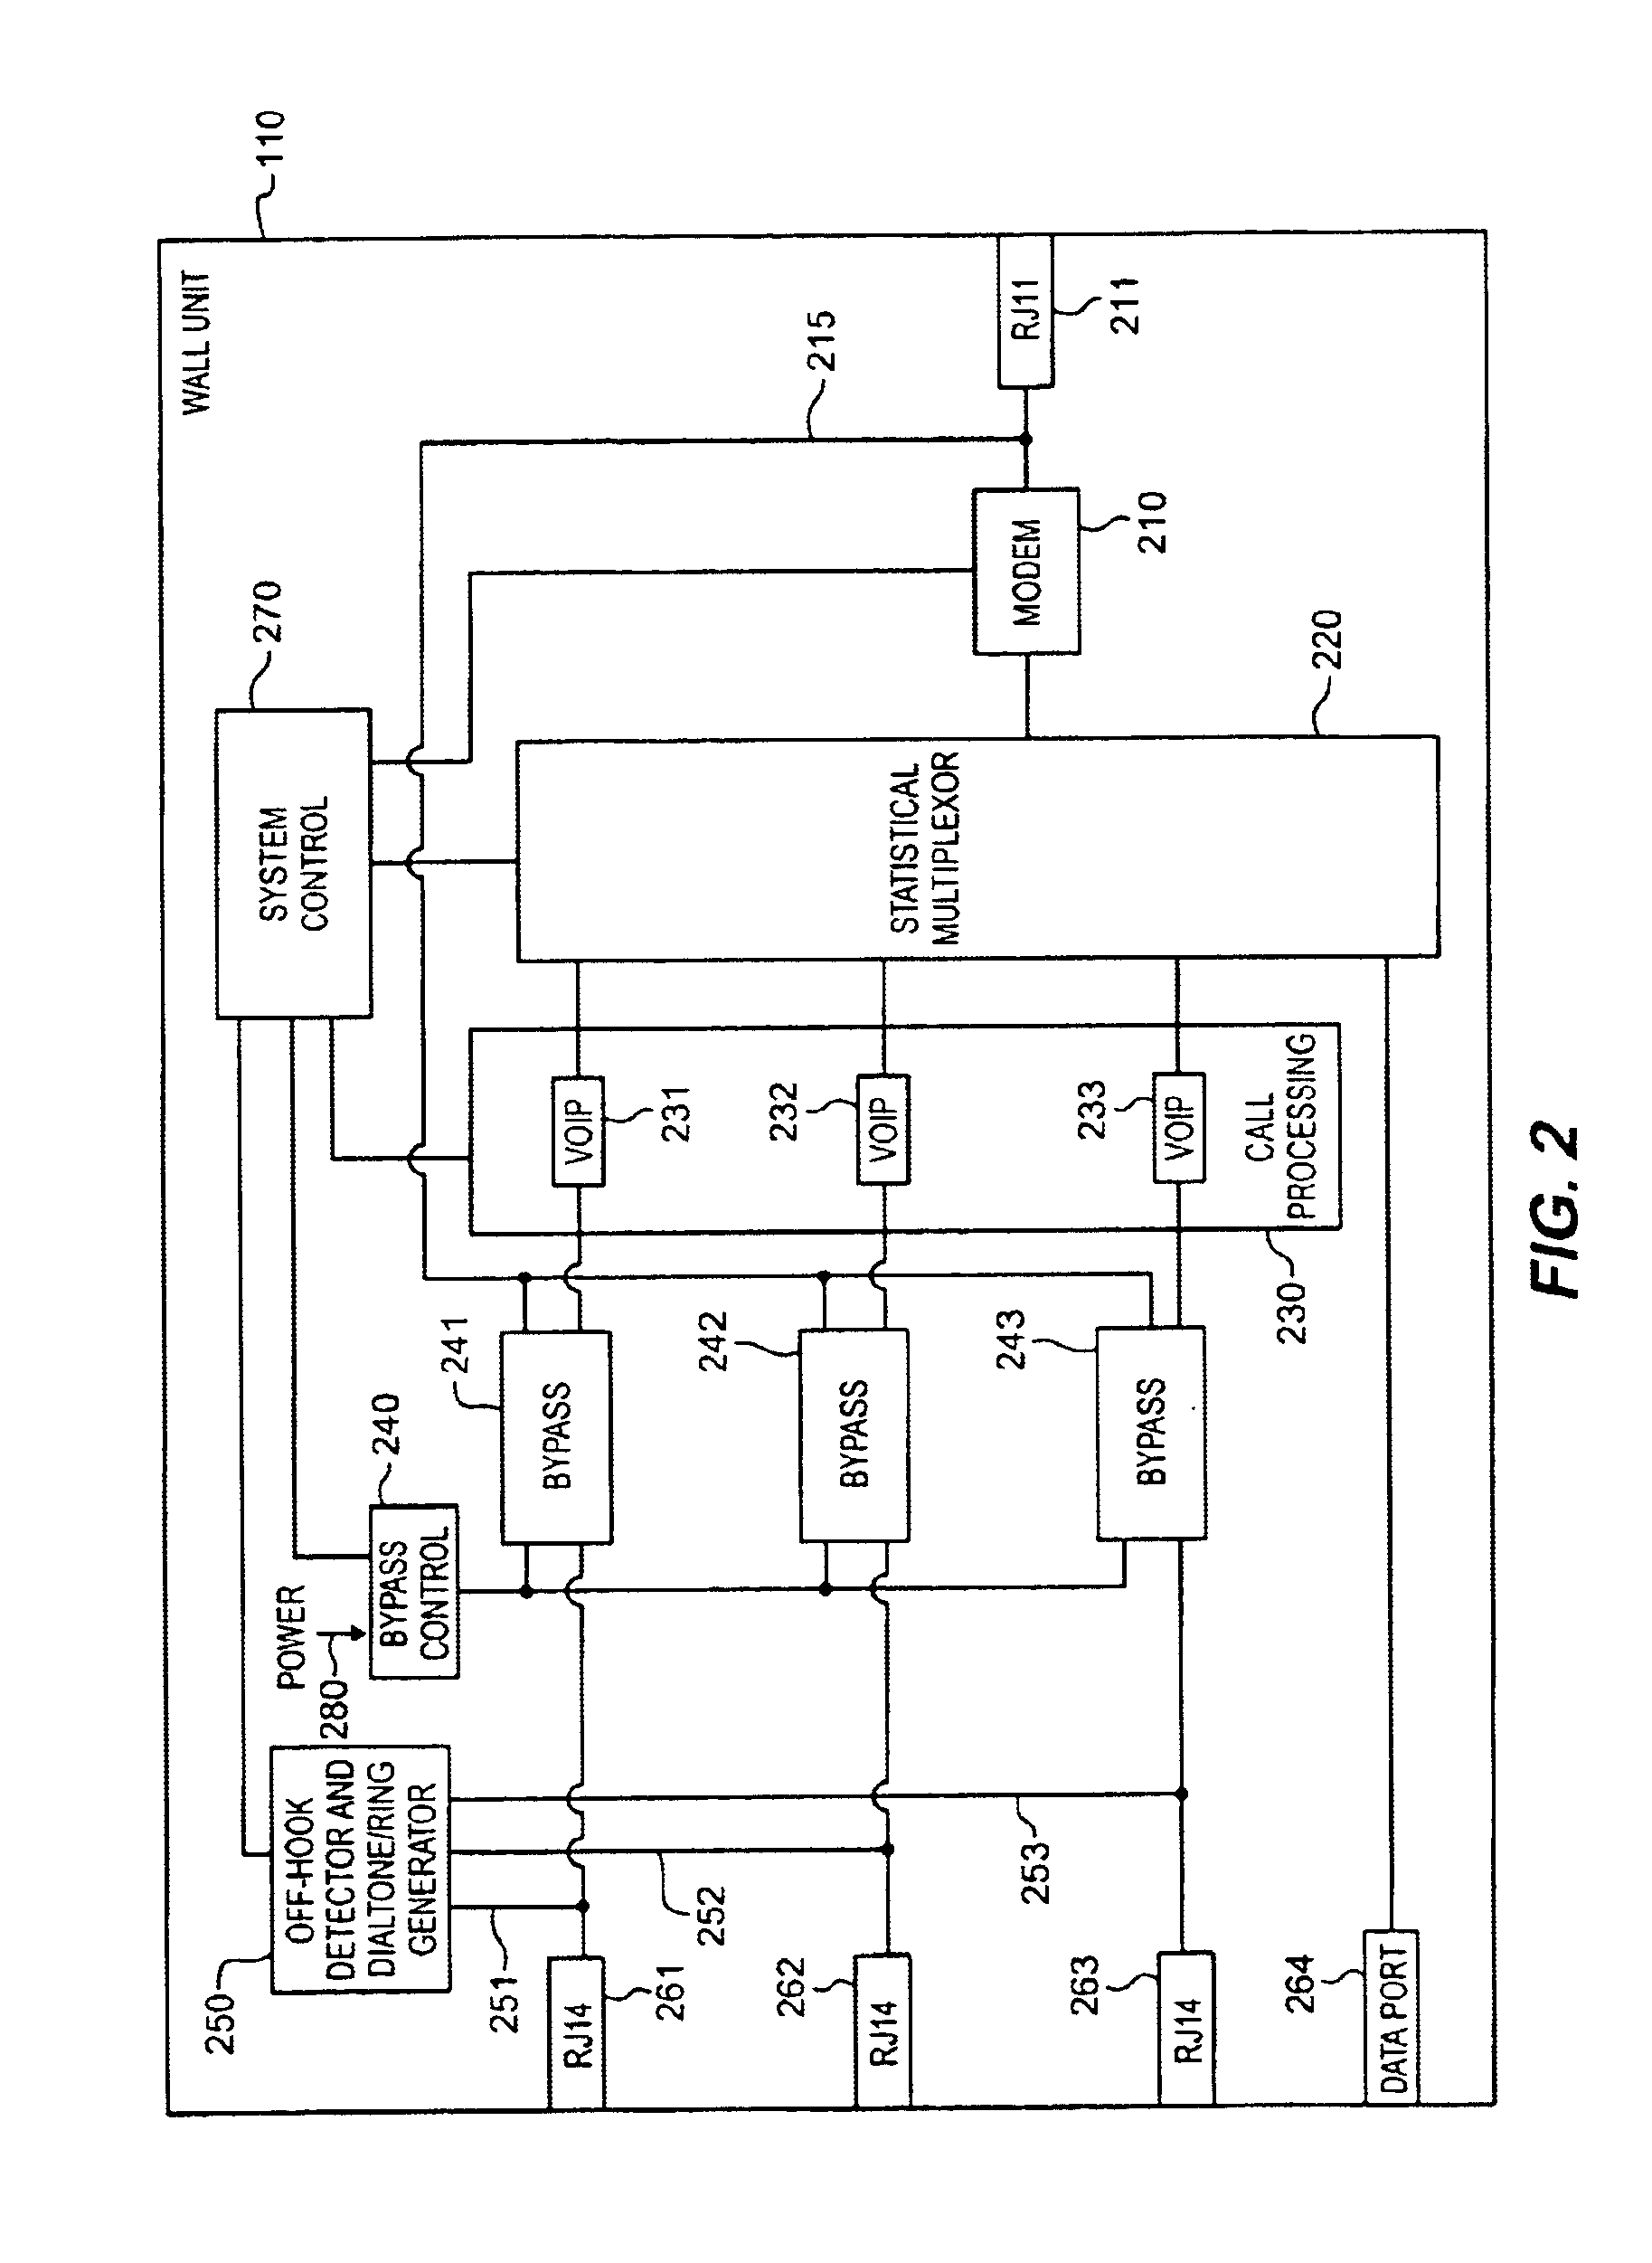 Method and apparatus for simultaneous multiline phone and data services over a single access facility